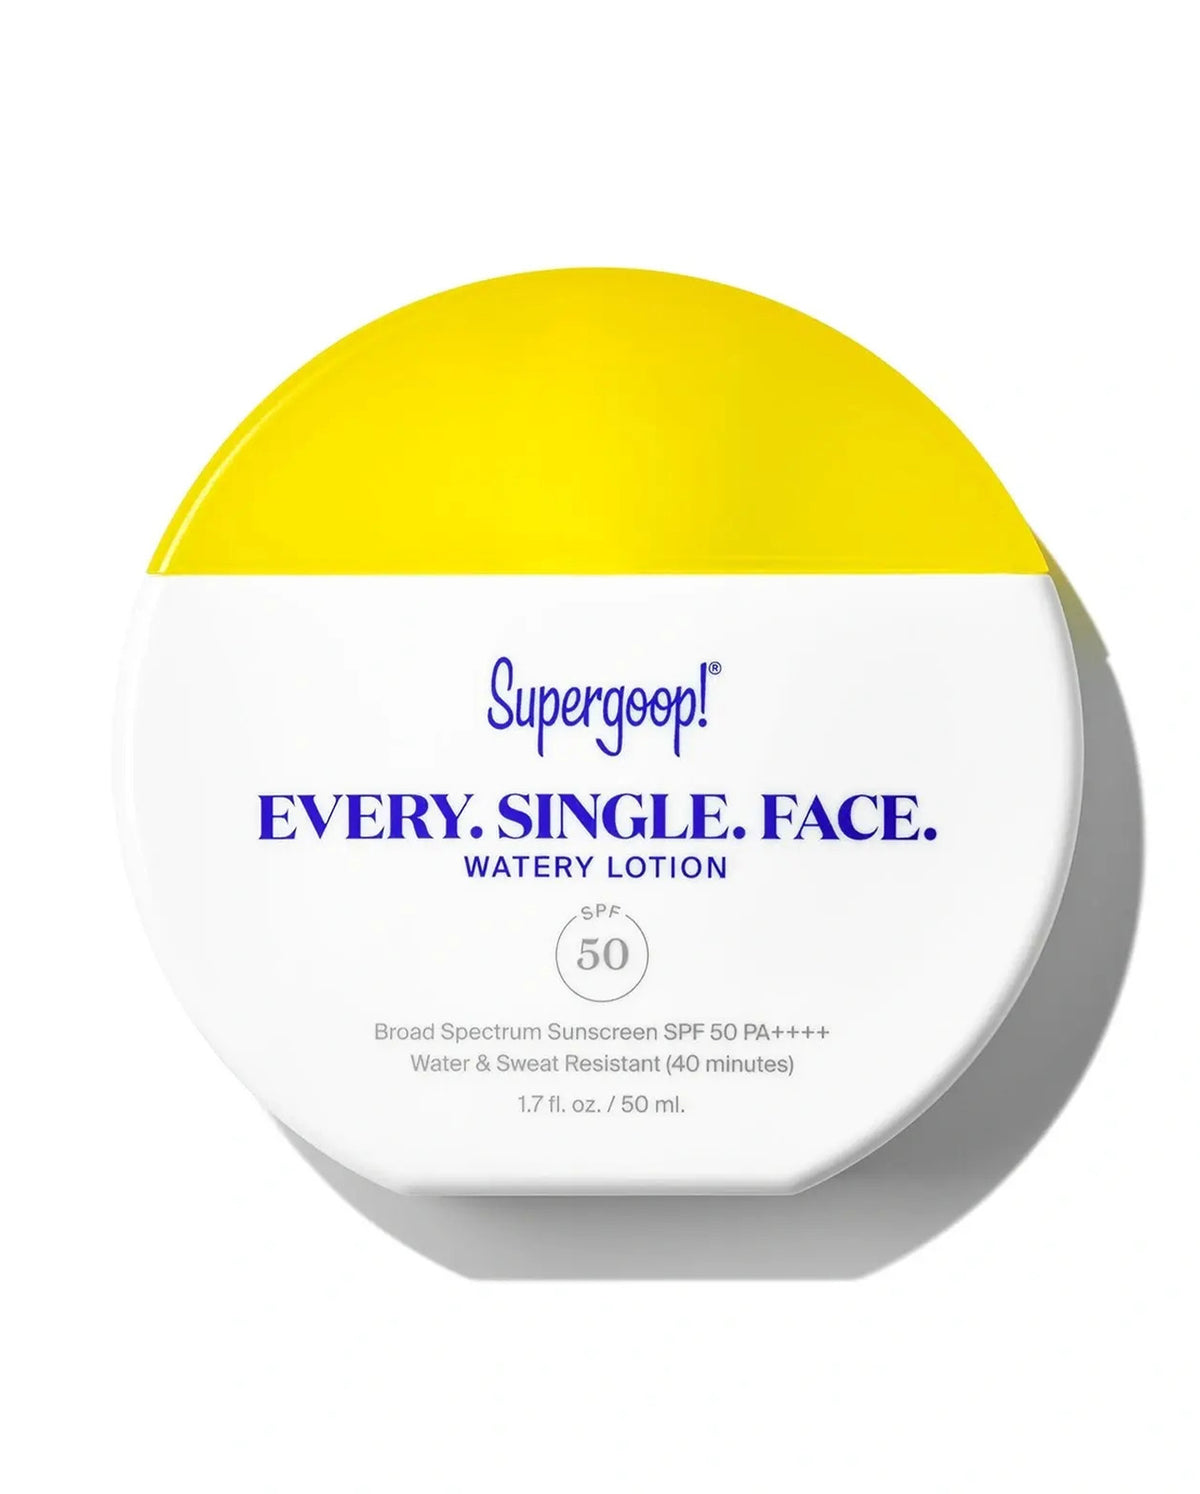 Every. Single. Face. Watery Lotion SPF 50